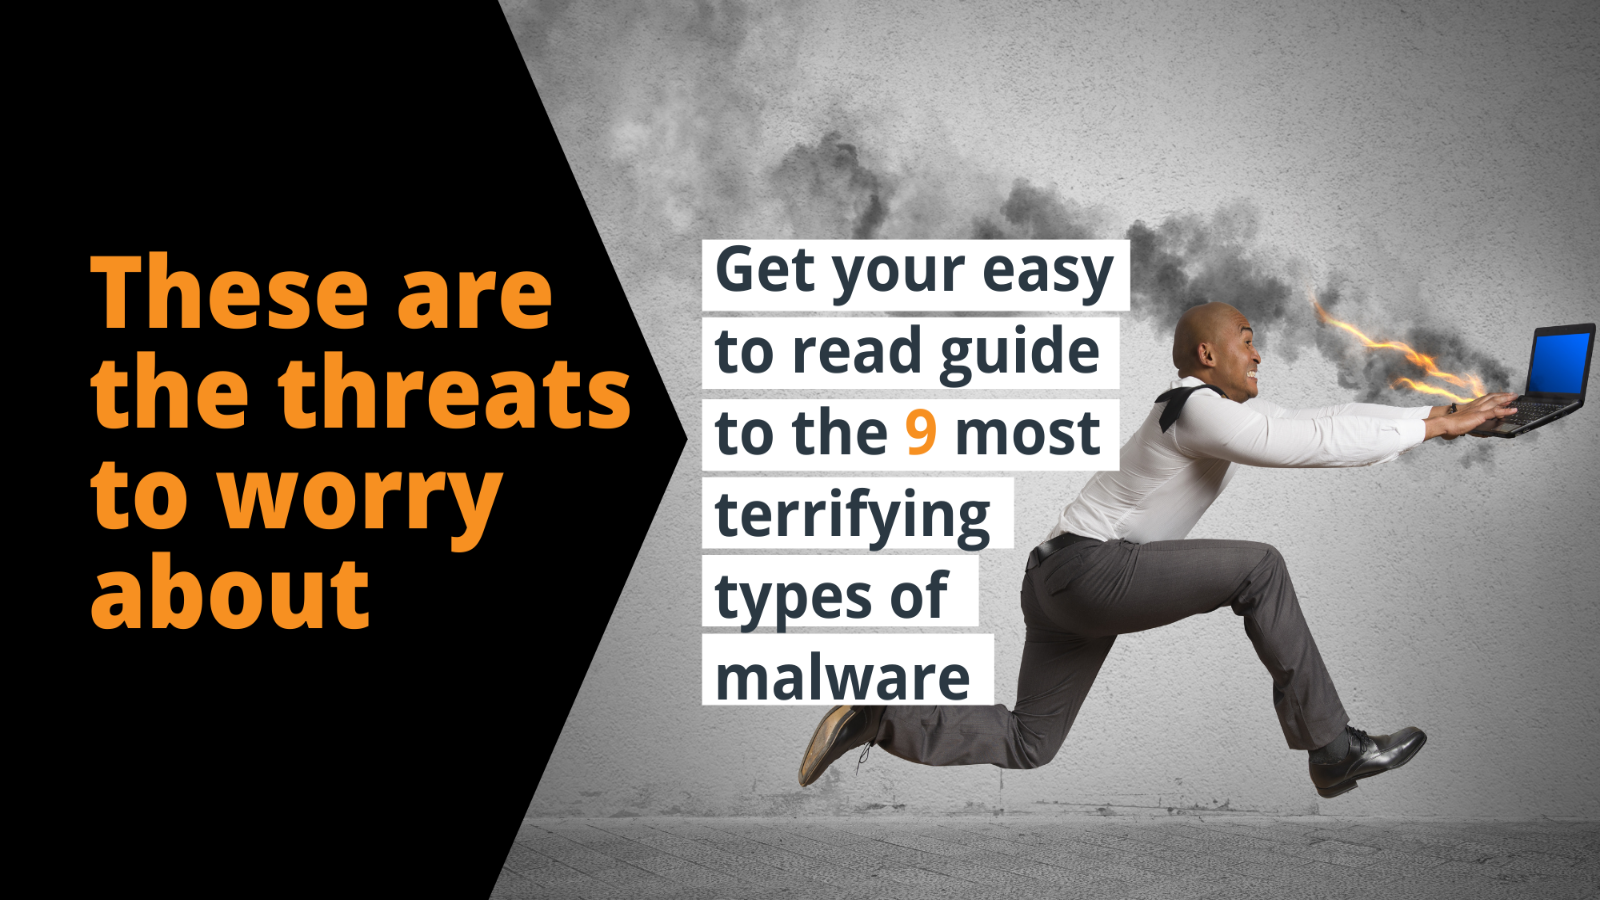 9 Types of Malware to Worry About